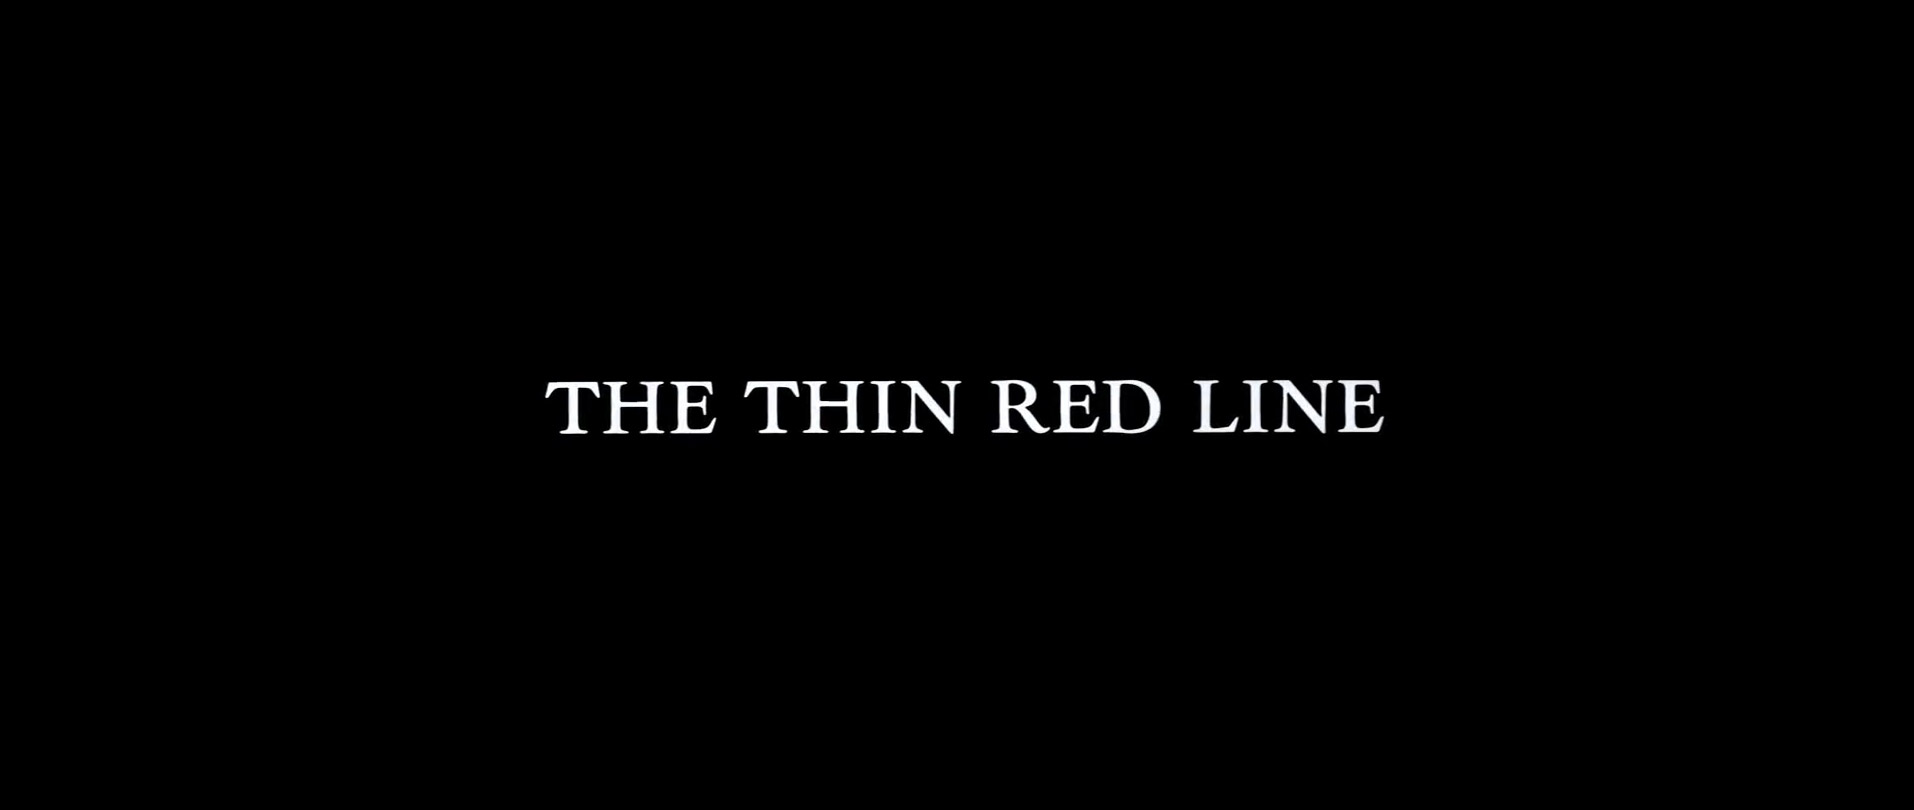 opening title in The Thin Red Line